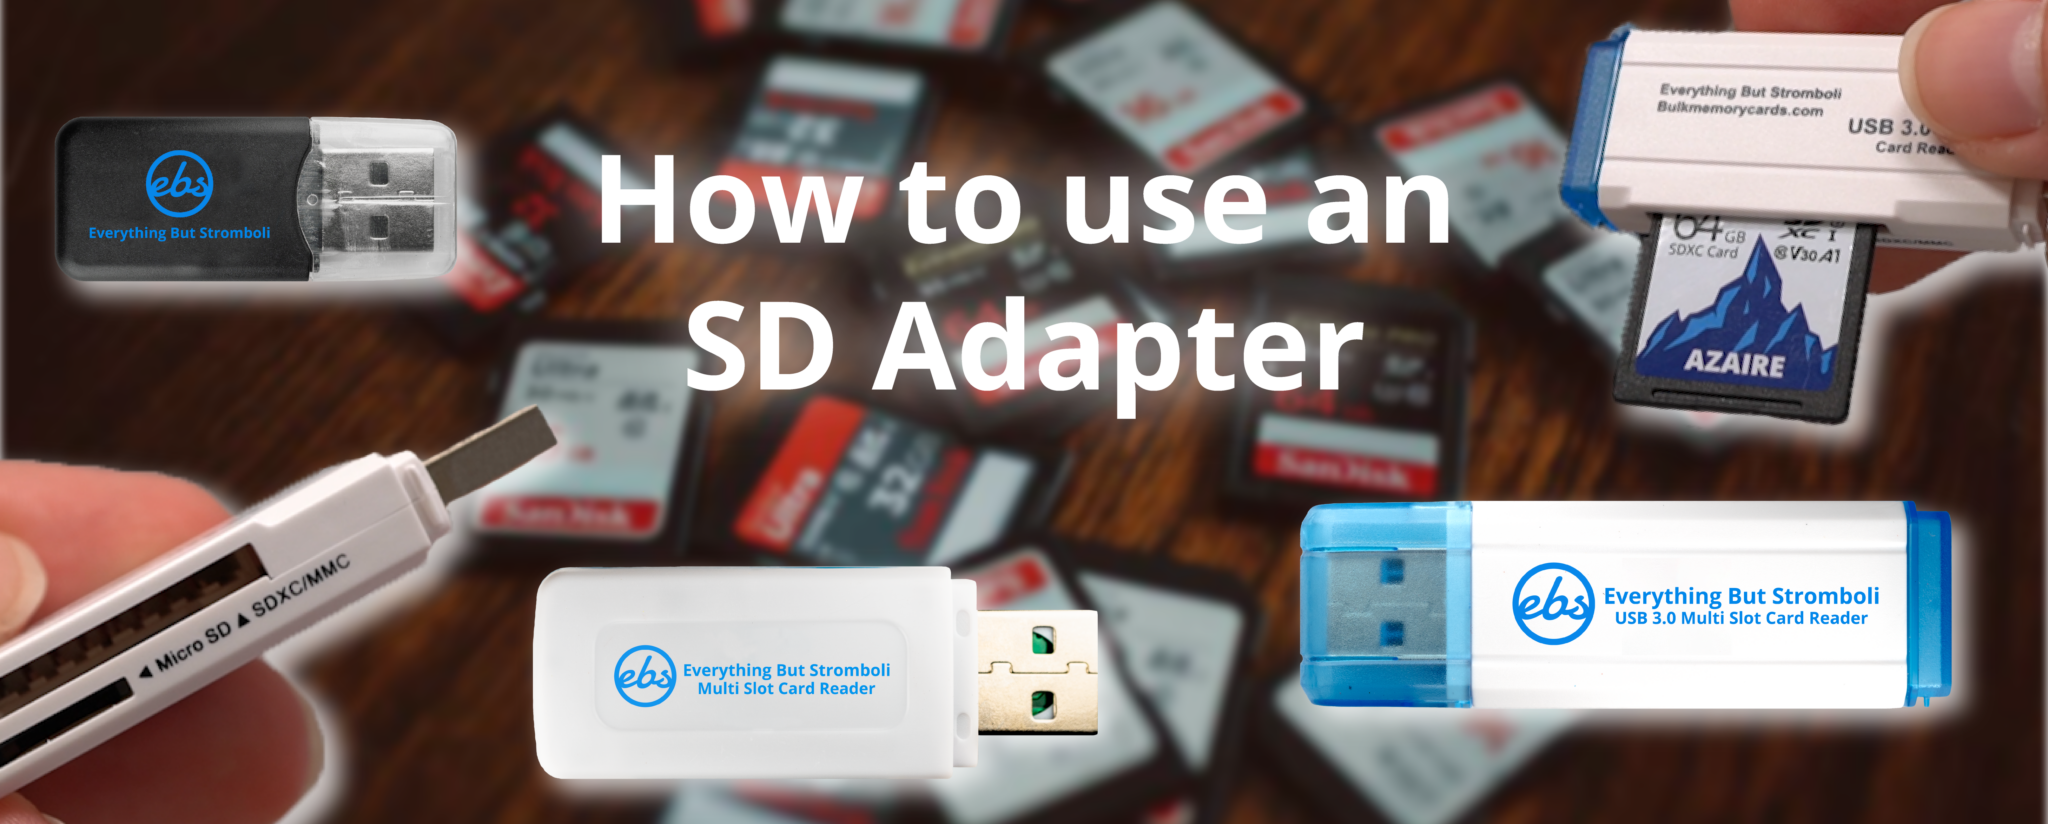 Insert SD card into the device's card slot or use a card reader.
Open the "File Manager" app.